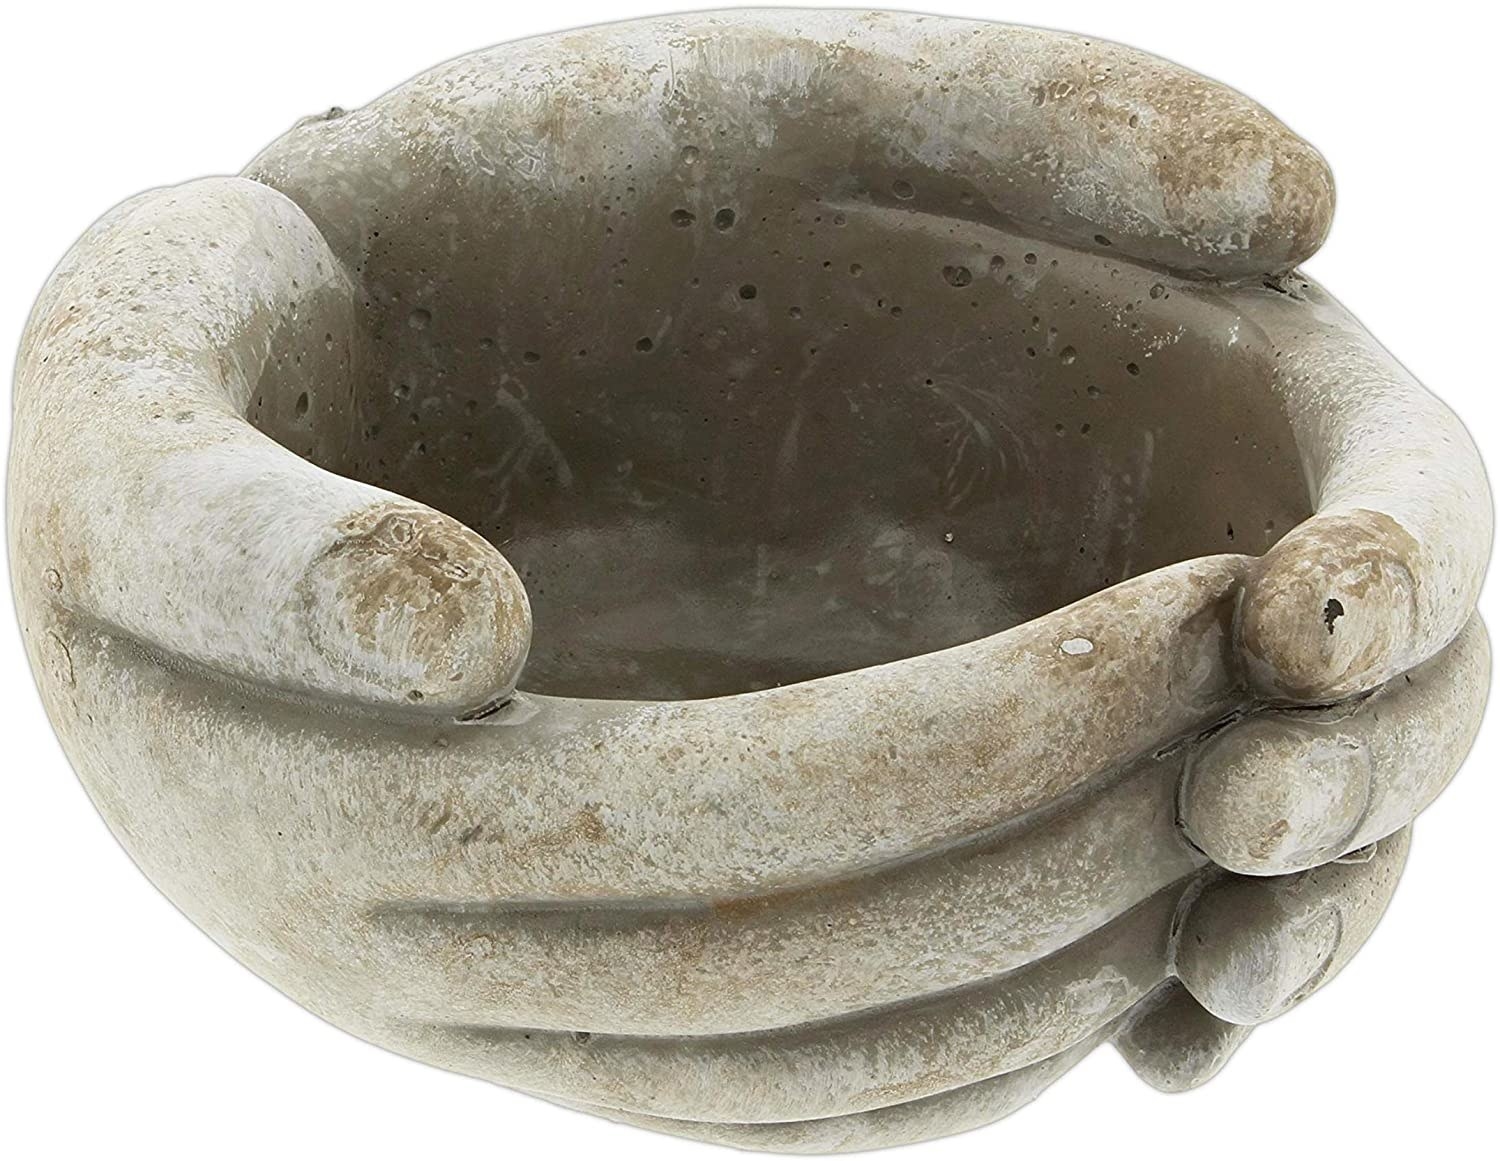 Cement planter shaped like cupped hand